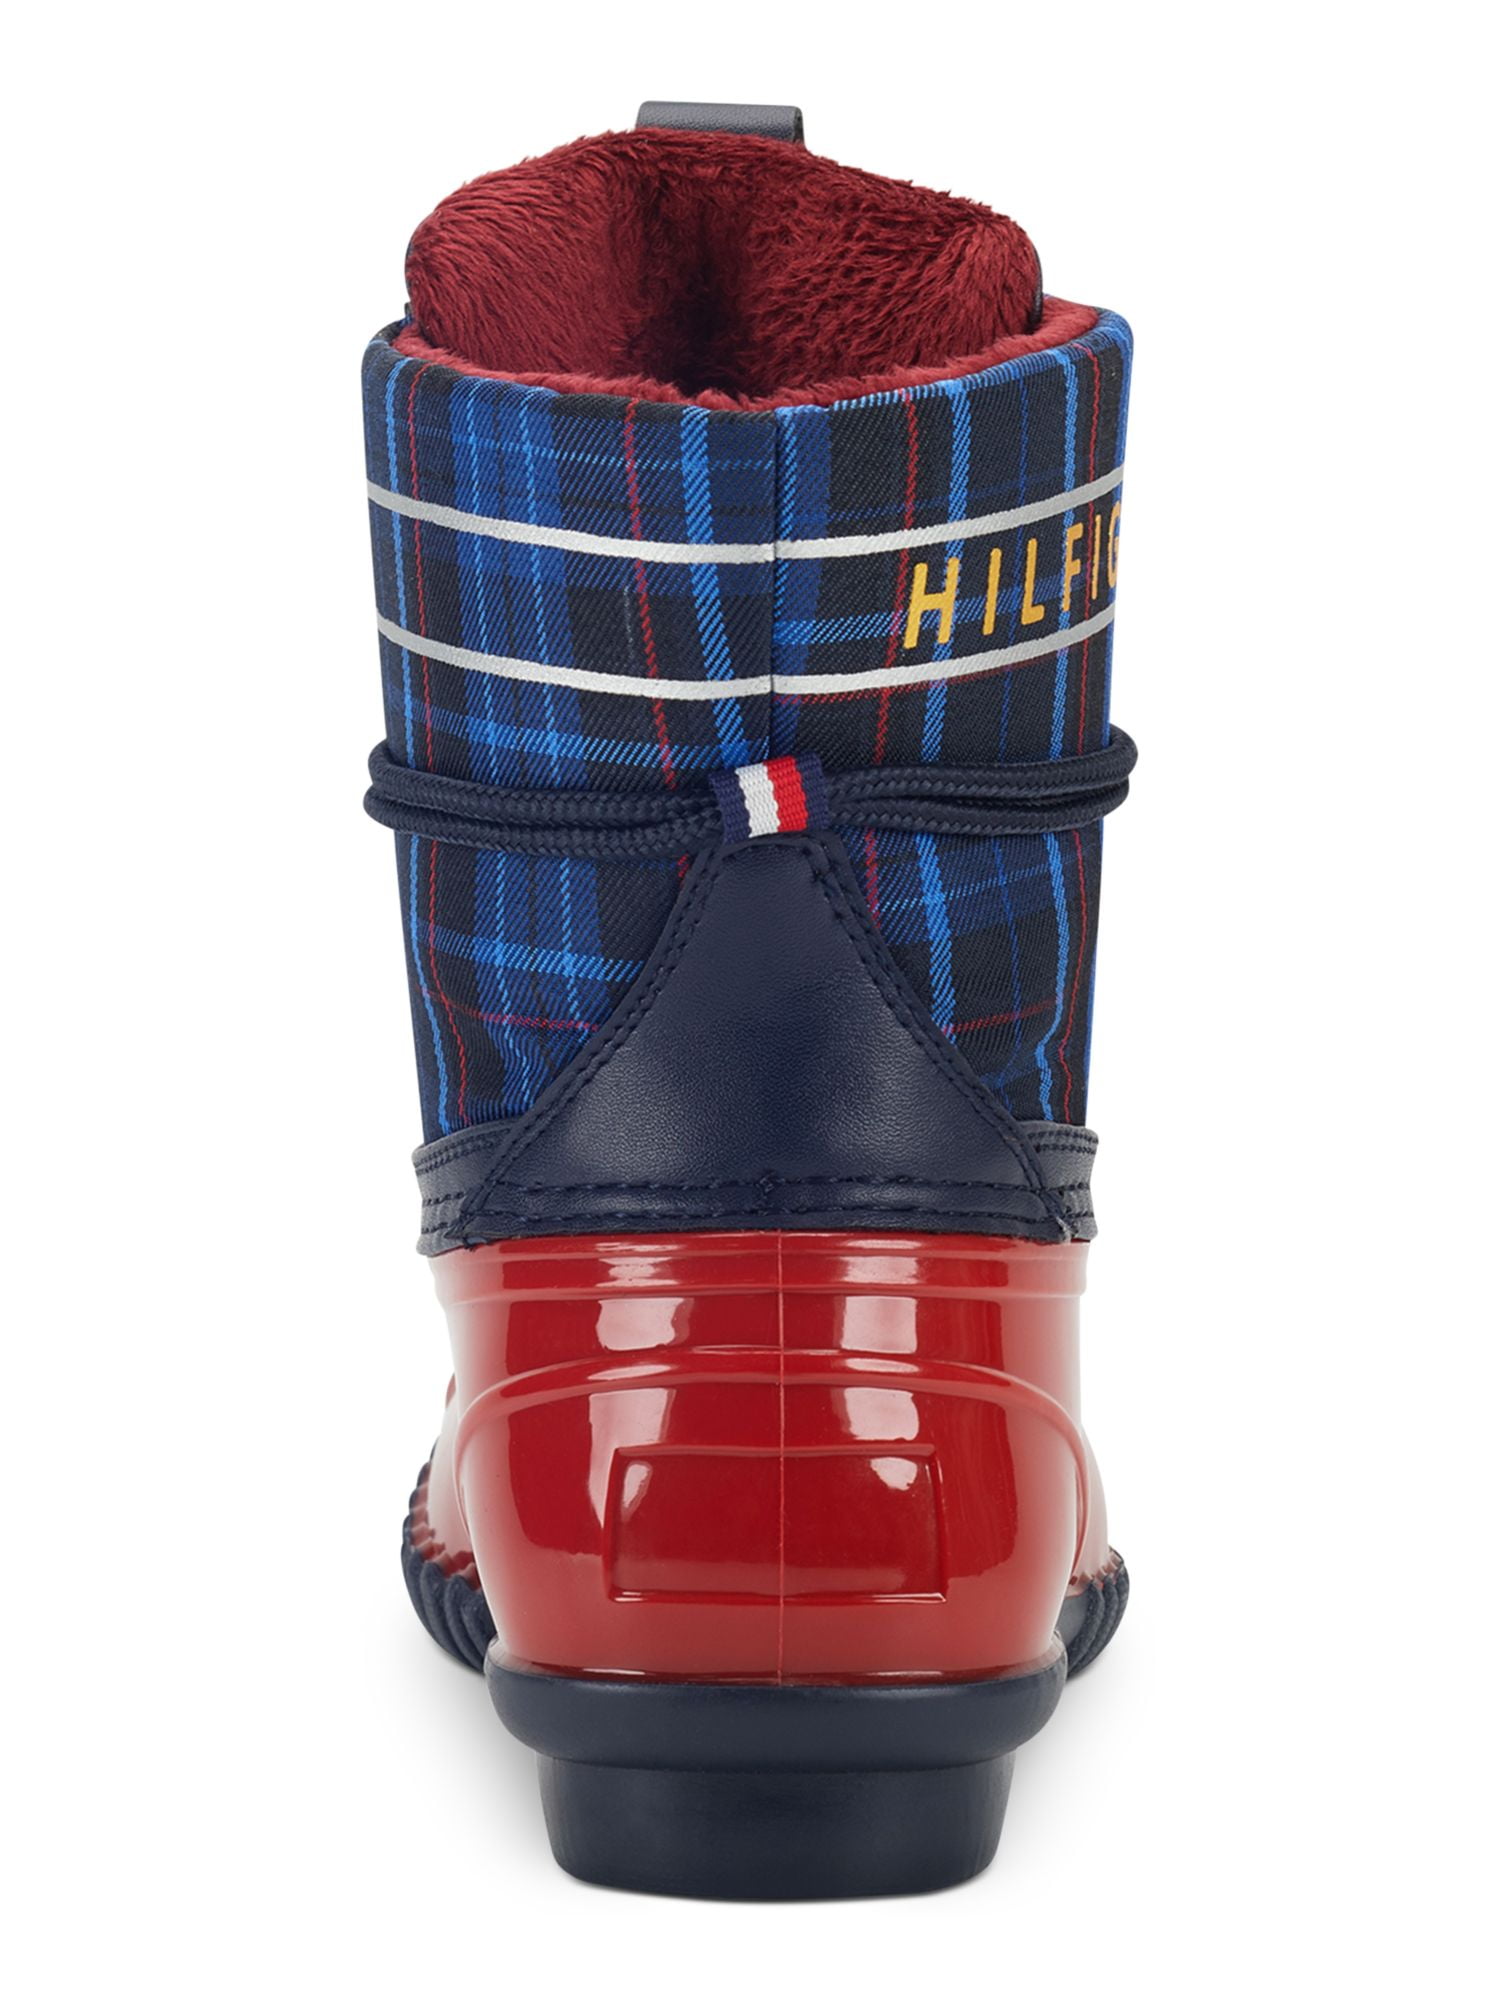 7 HILFIGER Logo Tag TOMMY Heel Front Navy And Pull Plaid Comfort Block Womens M Hessa Boots Eyelet Lace-Up Round Padded Back Waterproof Duck Toe